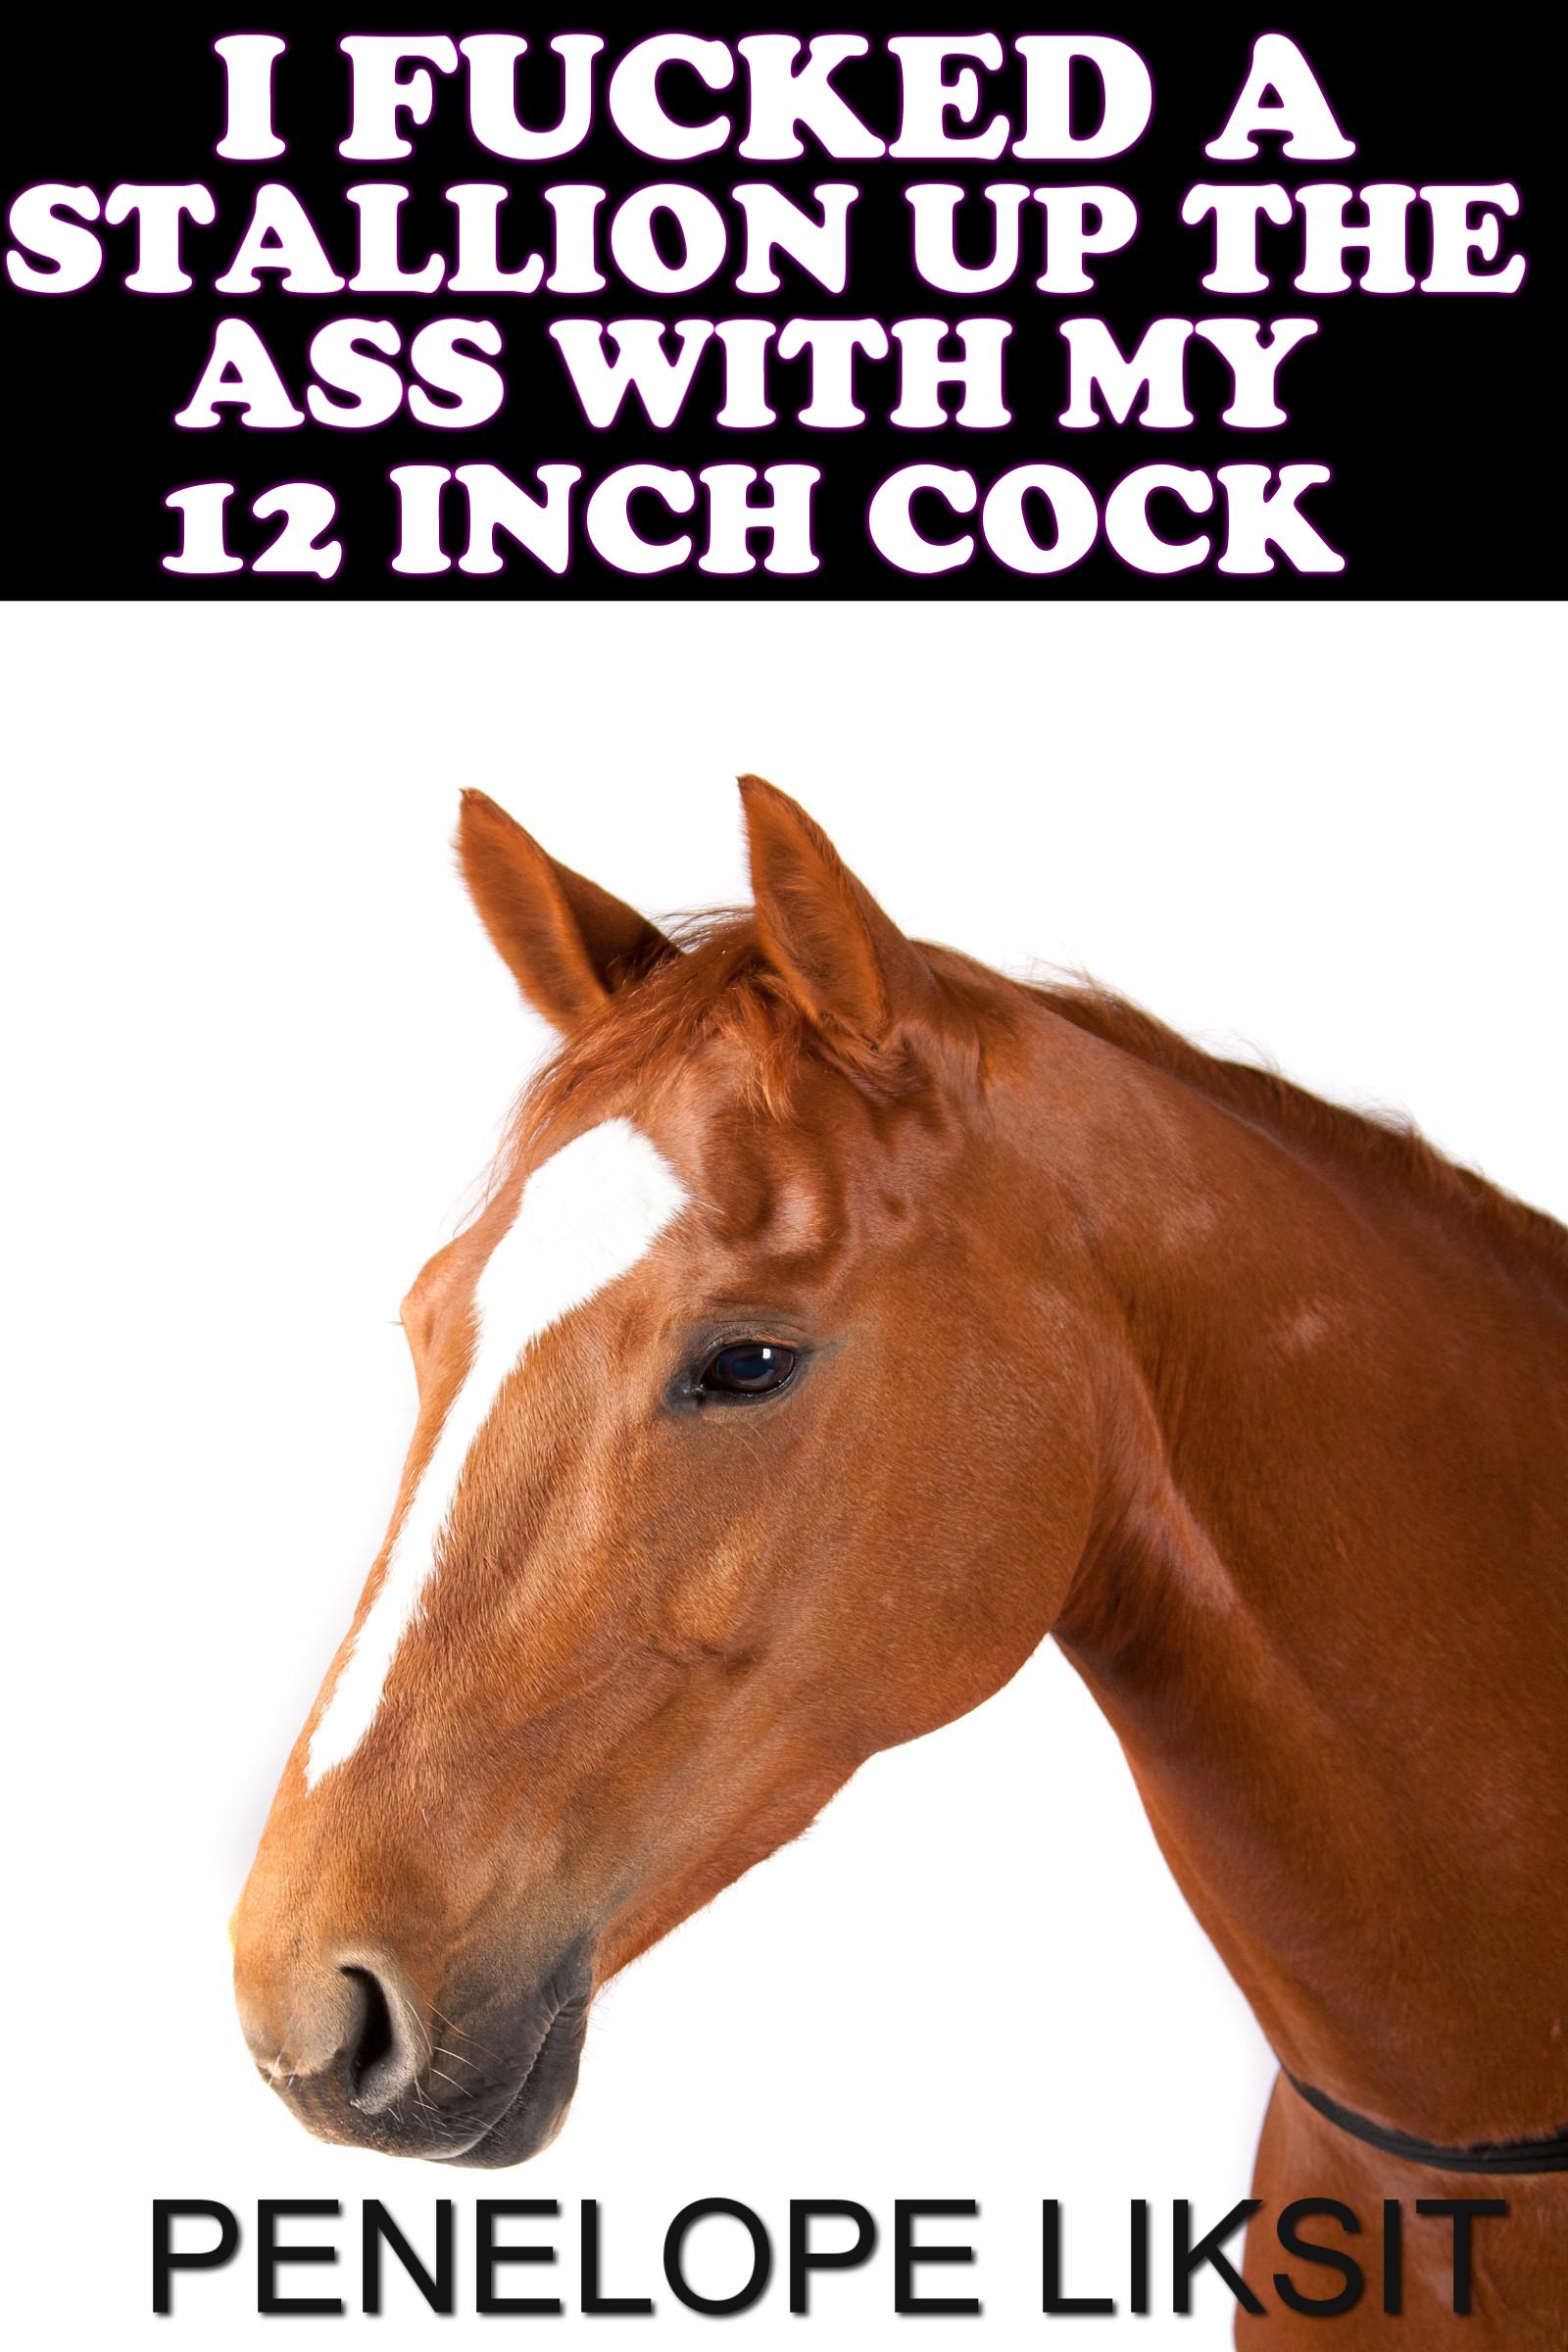 Horse Cock Story